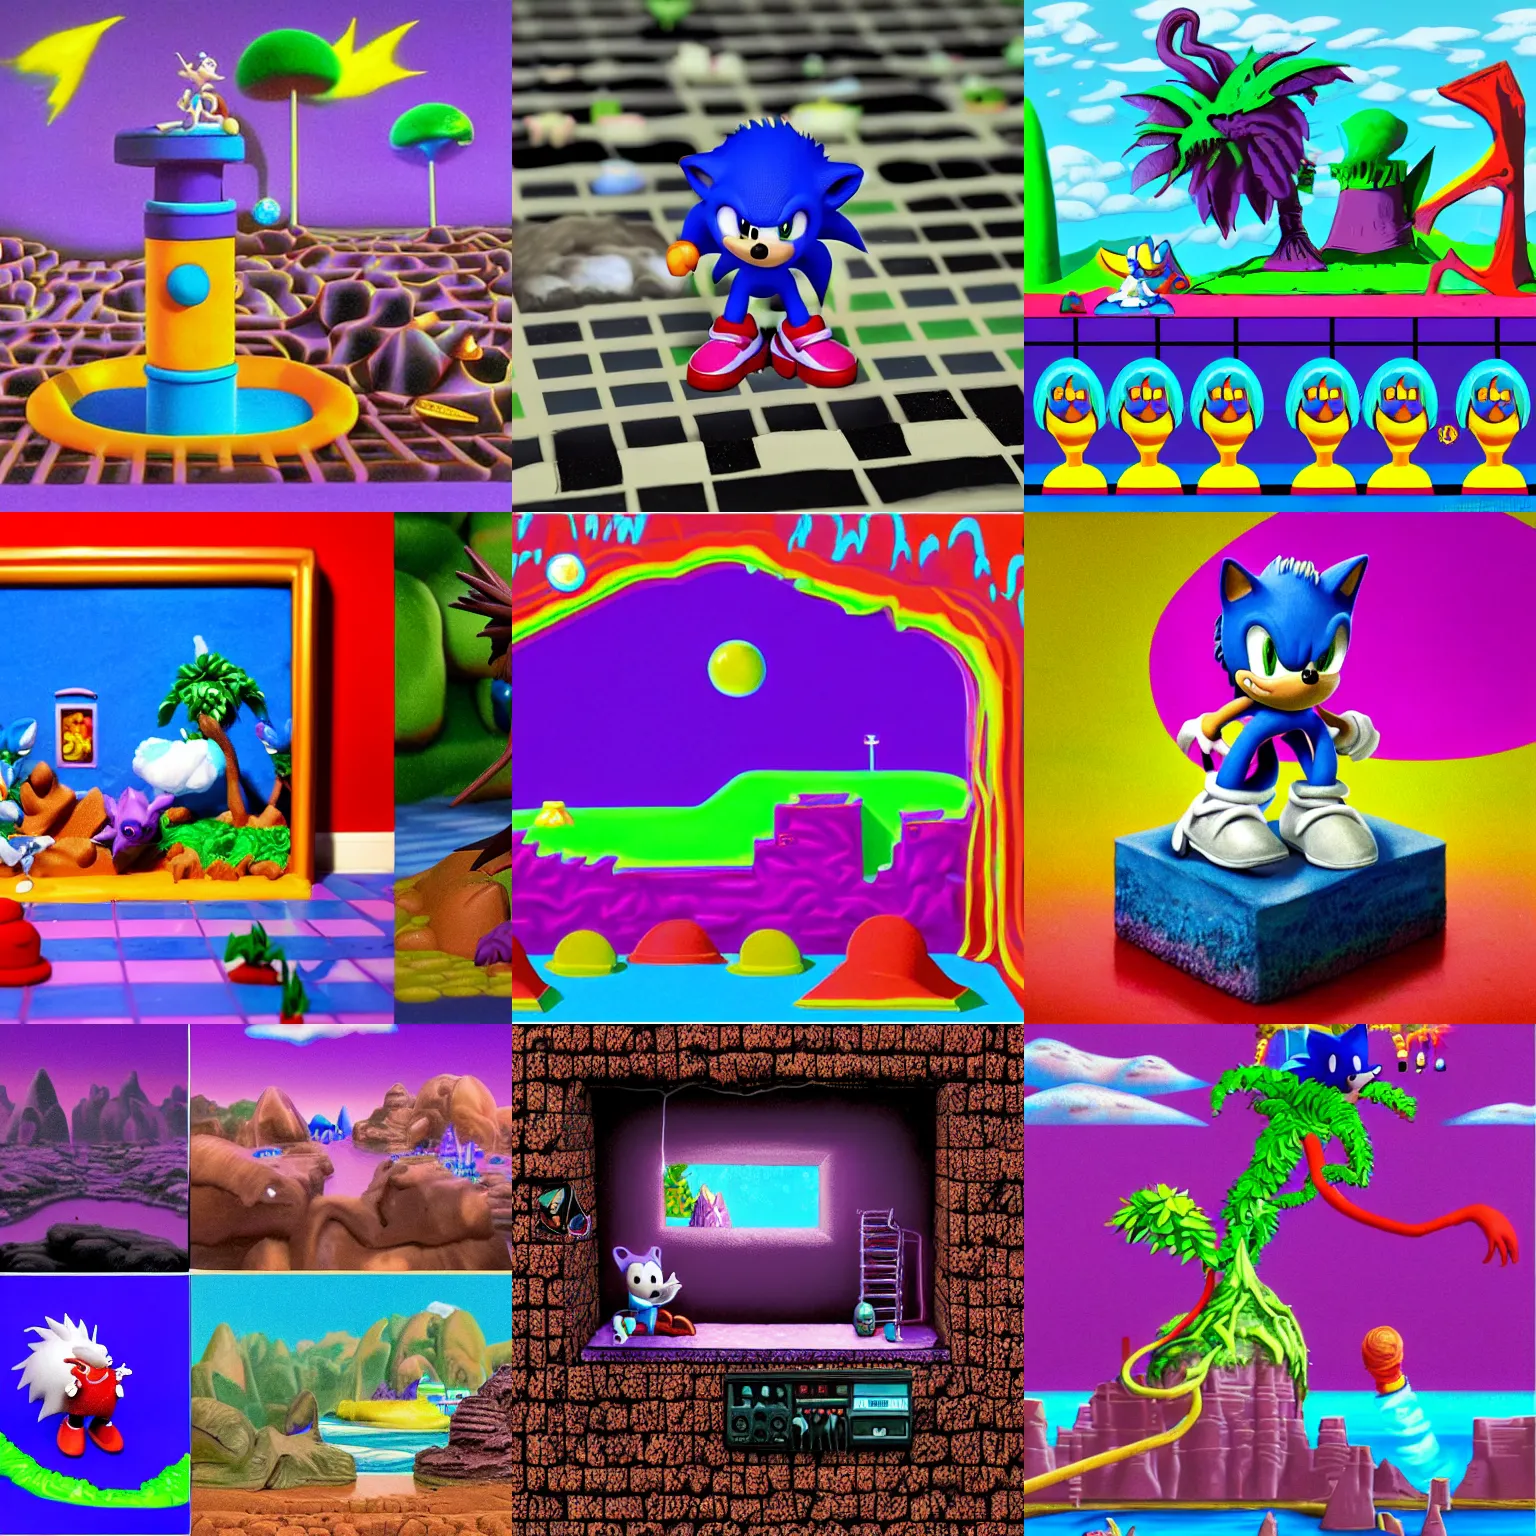 Prompt: clay stop motion claymation portrait of sonic hedgehog and a matte painting landscape of a surreal sharp, detailed professional soft pastels high quality airbrush art lava lamp album cover liquid dissolving airbrush art lsd dmt sonic the hedgehog swimming through cyberspace purple checkerboard background 1 9 9 0 s 1 9 9 2 sega genesis rareware video game album cover